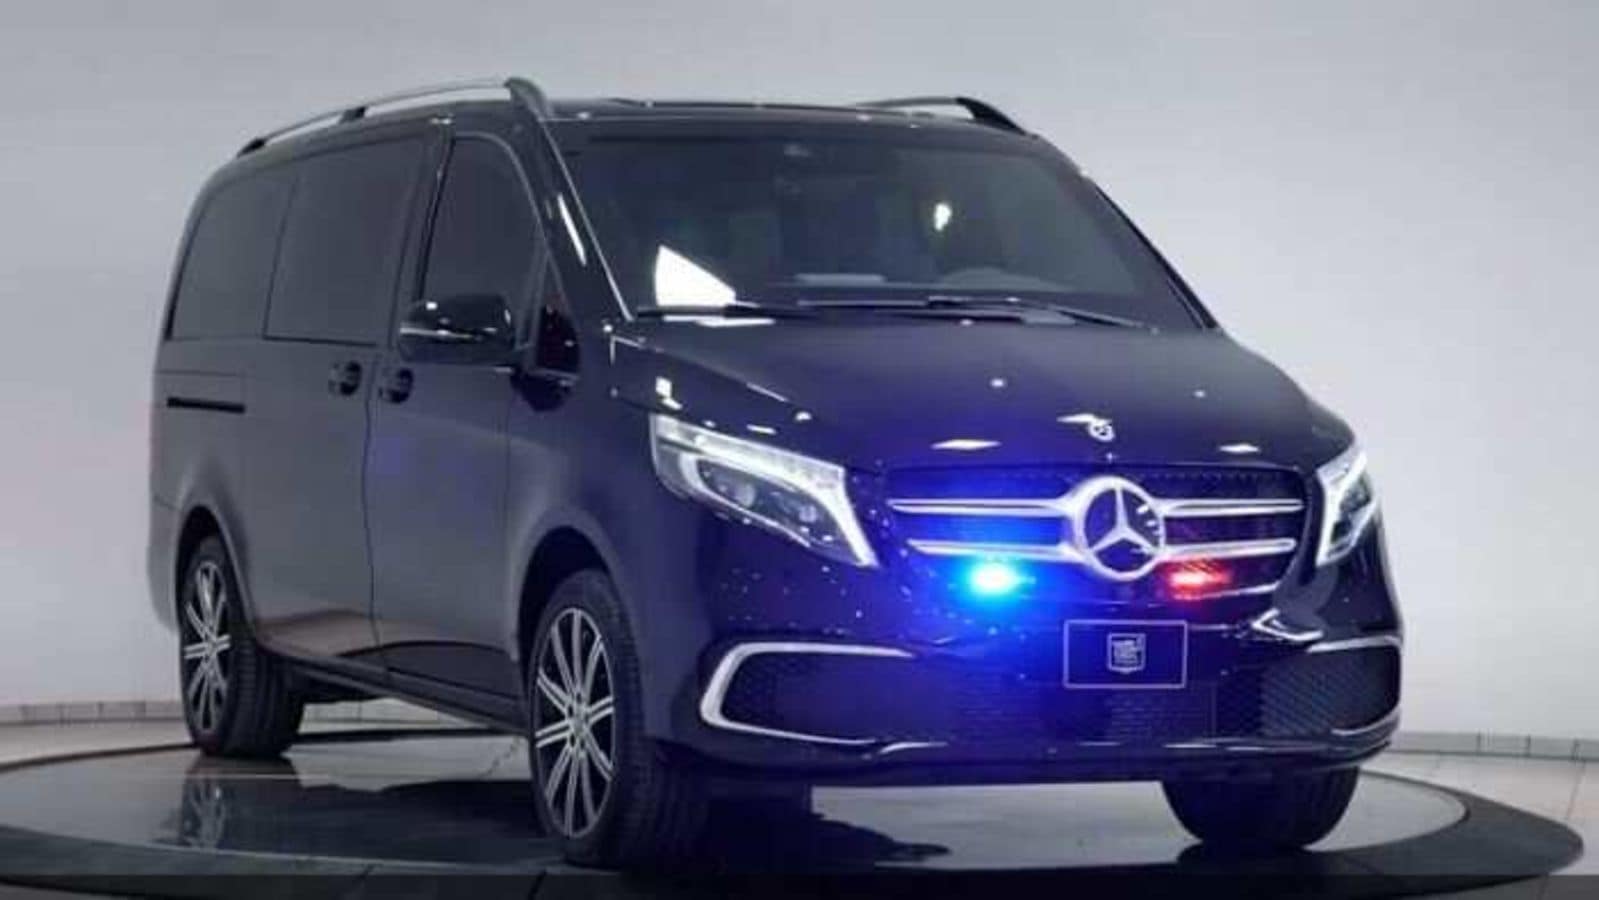 Here's yet another armored Mercedes vehicle that can survive bullets,  grenades